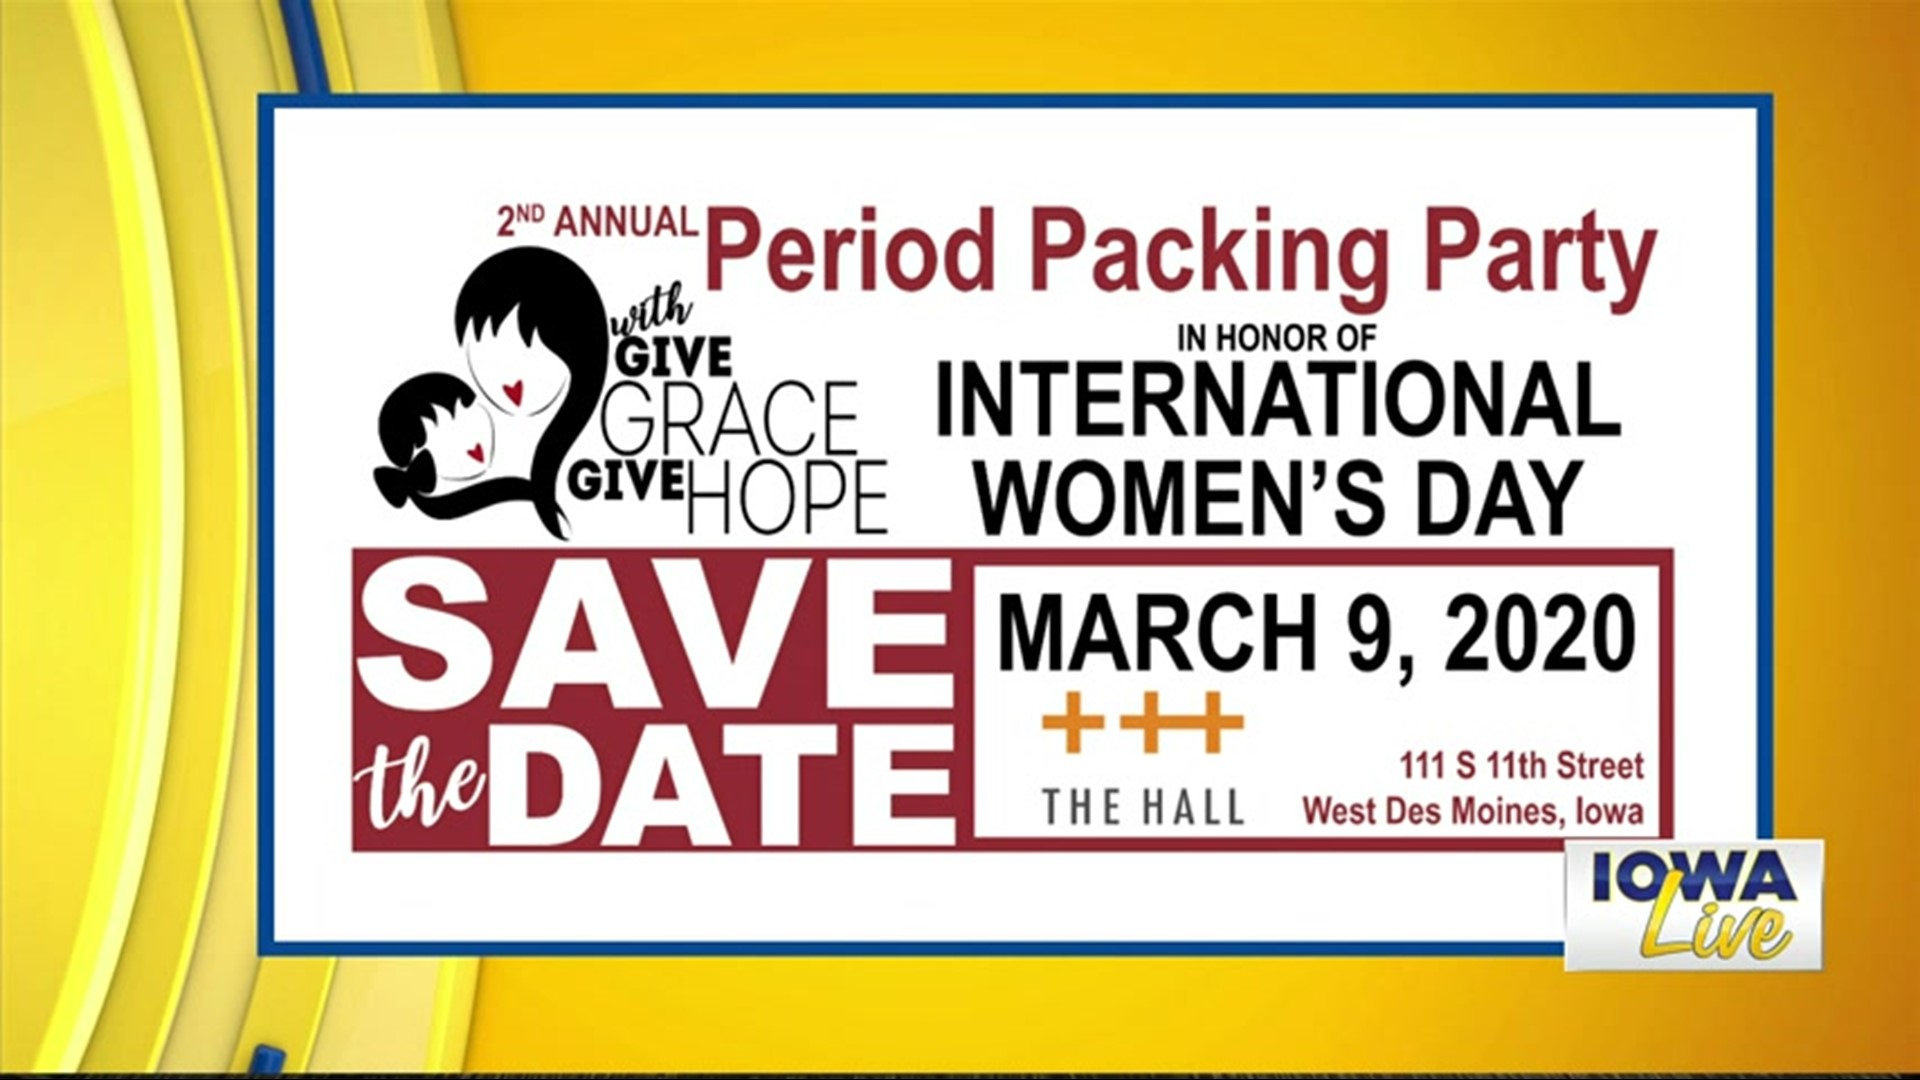 Period Packing Party - Give Grace, Give Hope